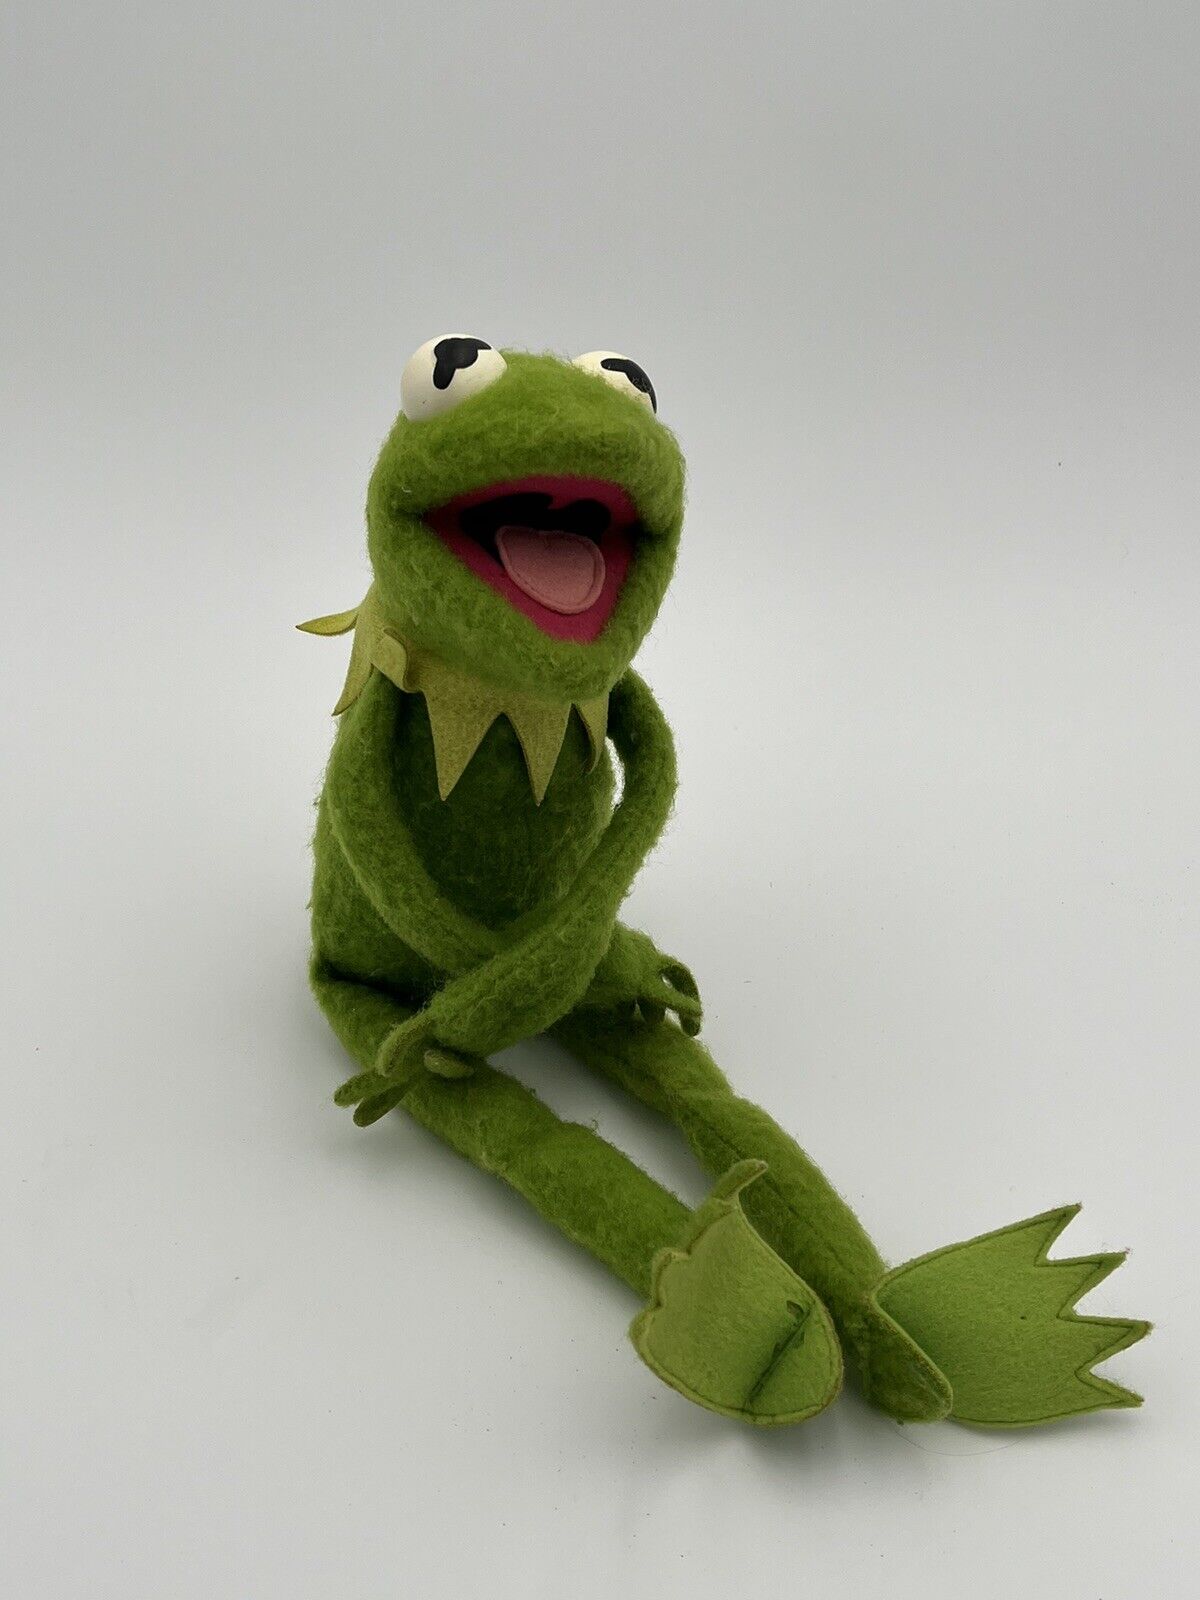 Vintage KERMIT THEE FROG HERE #850 Jim Henson Muppet Plush Toy Fisher Price 1976